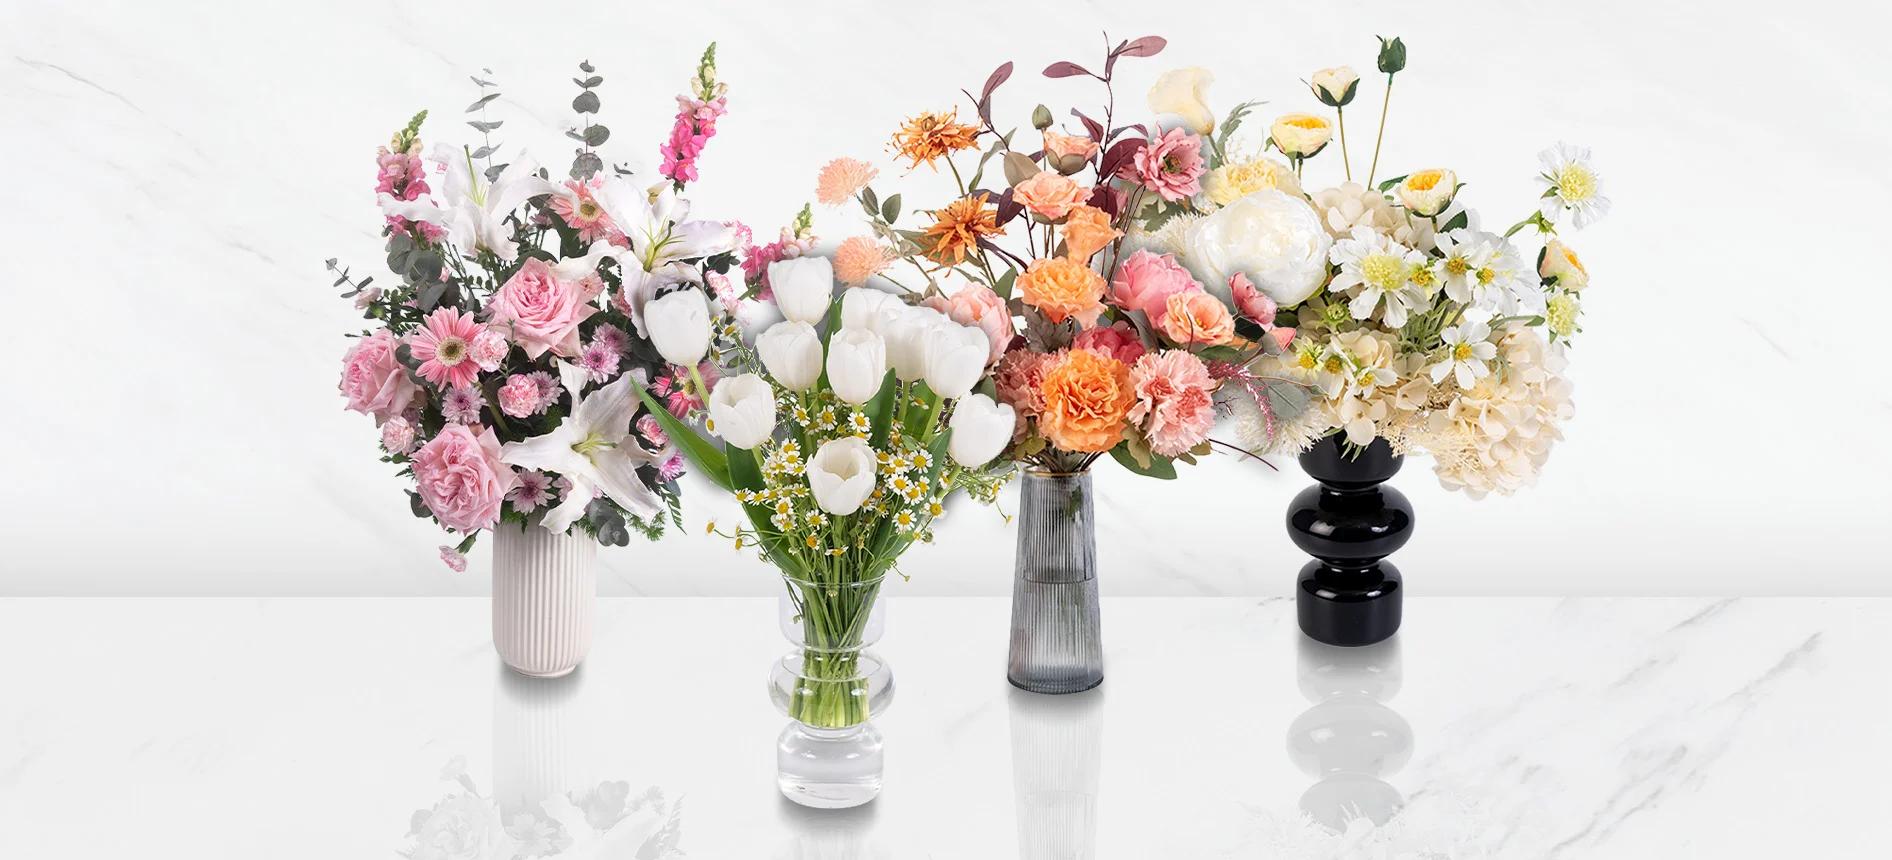 Fresh Flower Vase and Artificial Flower  Vases Suitable as a congratulatory gift.